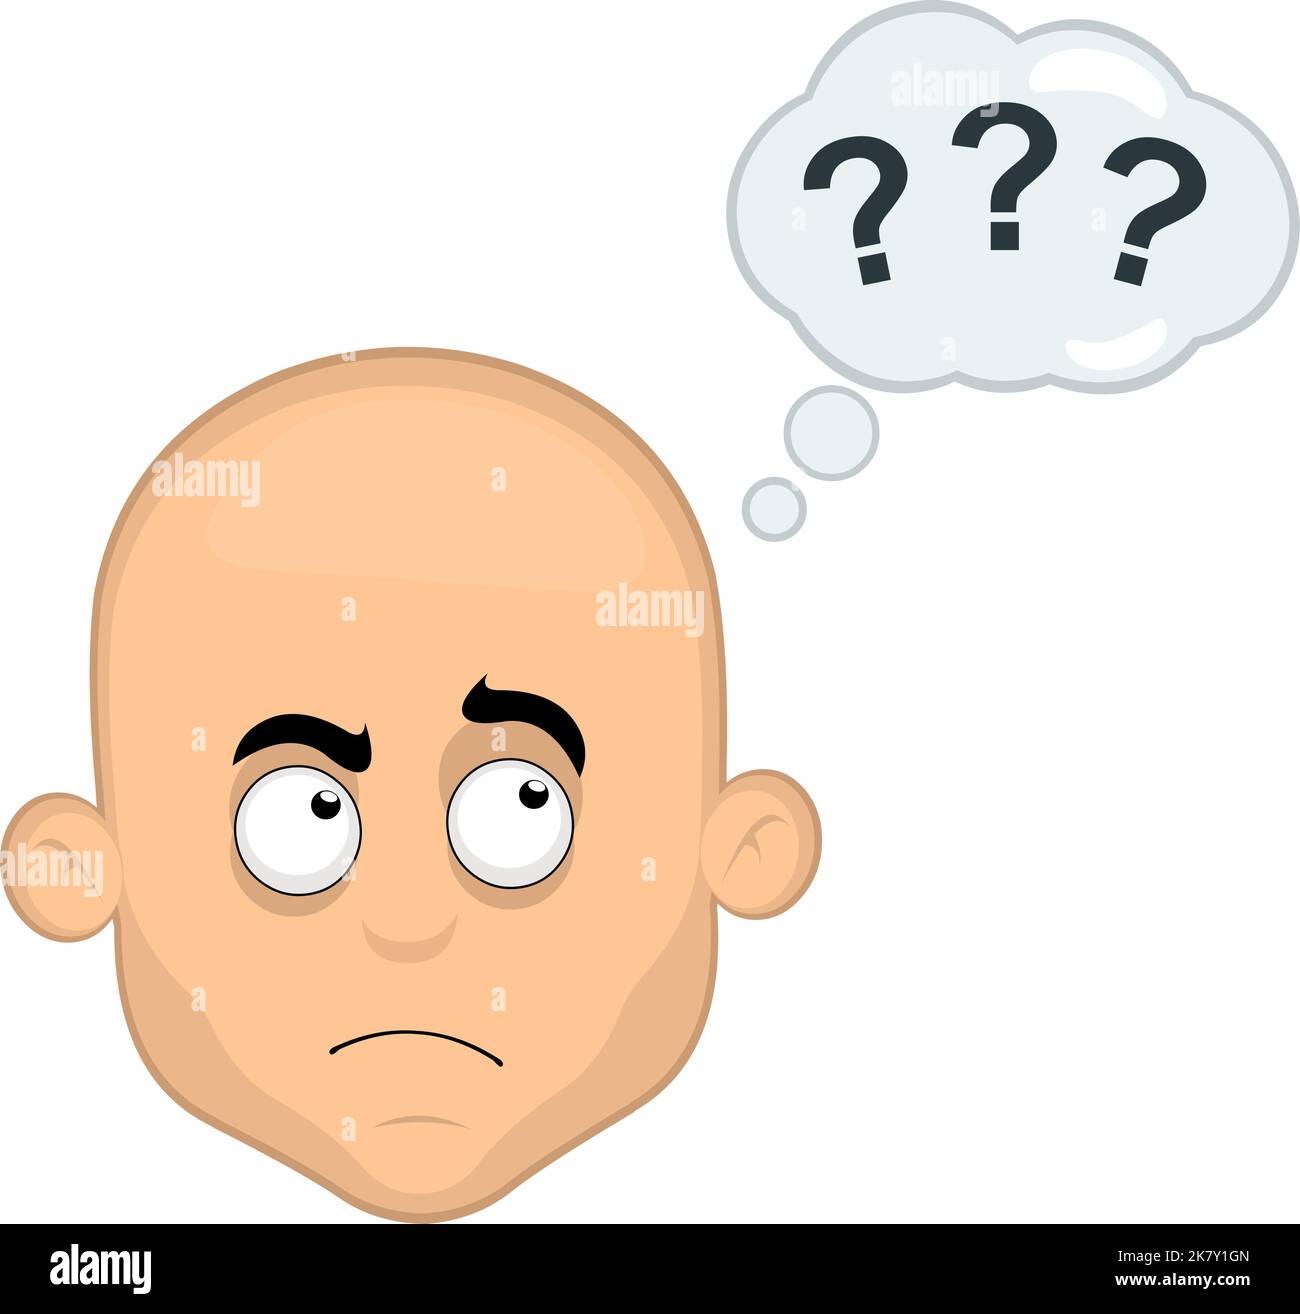 Vector illustration of the head of a bald cartoon man, with a thinking or doubt expression and a thought cloud with question marks Stock Vector